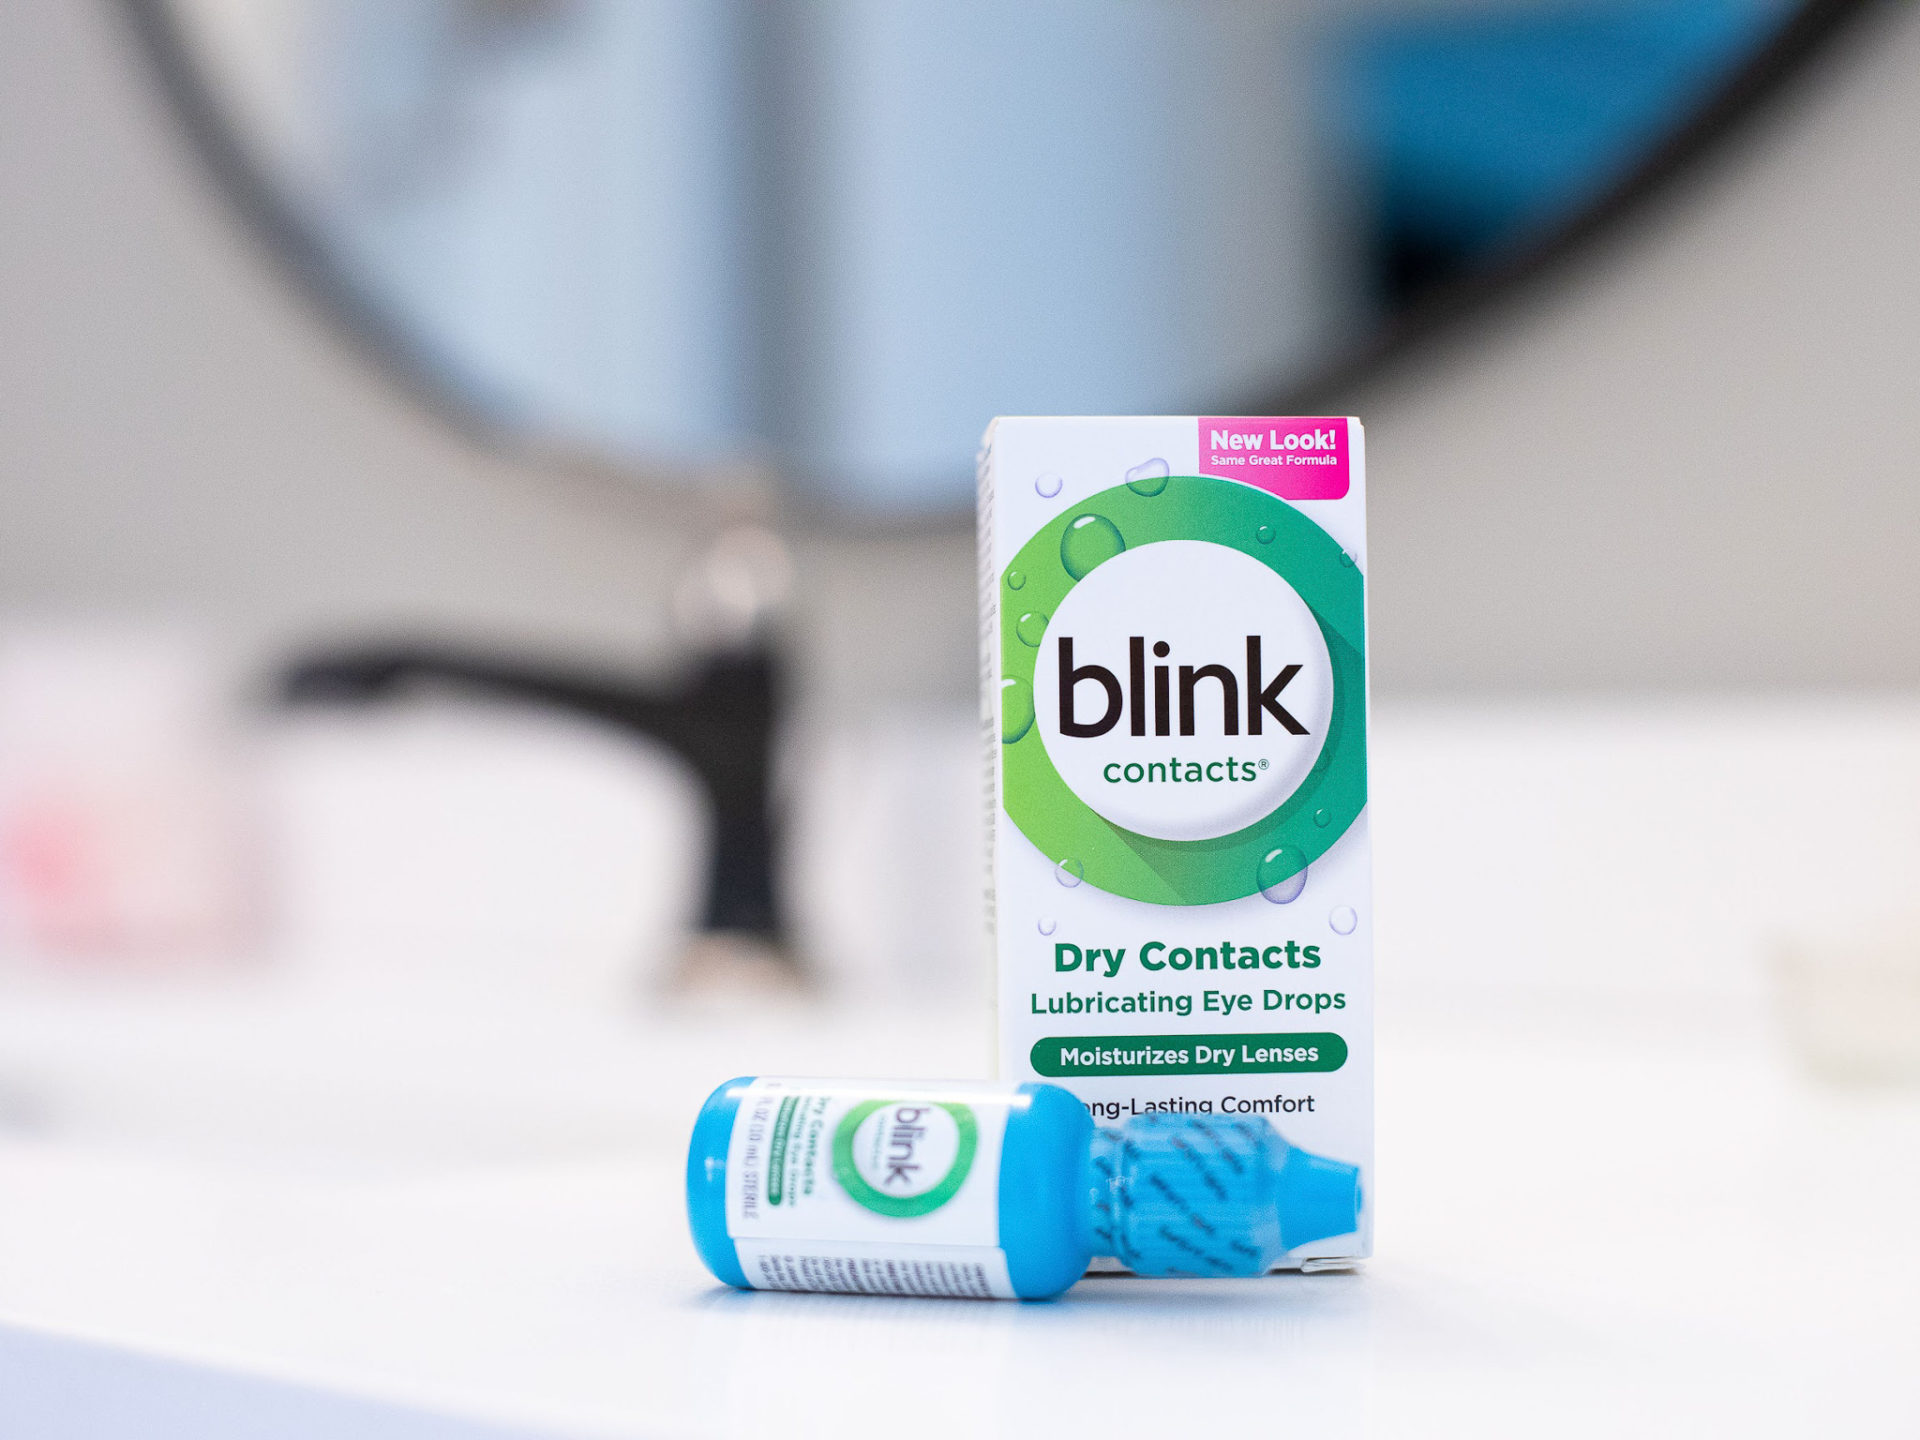 Blink Contacts Lubricating Eye Drops Just $2.99 At Kroger